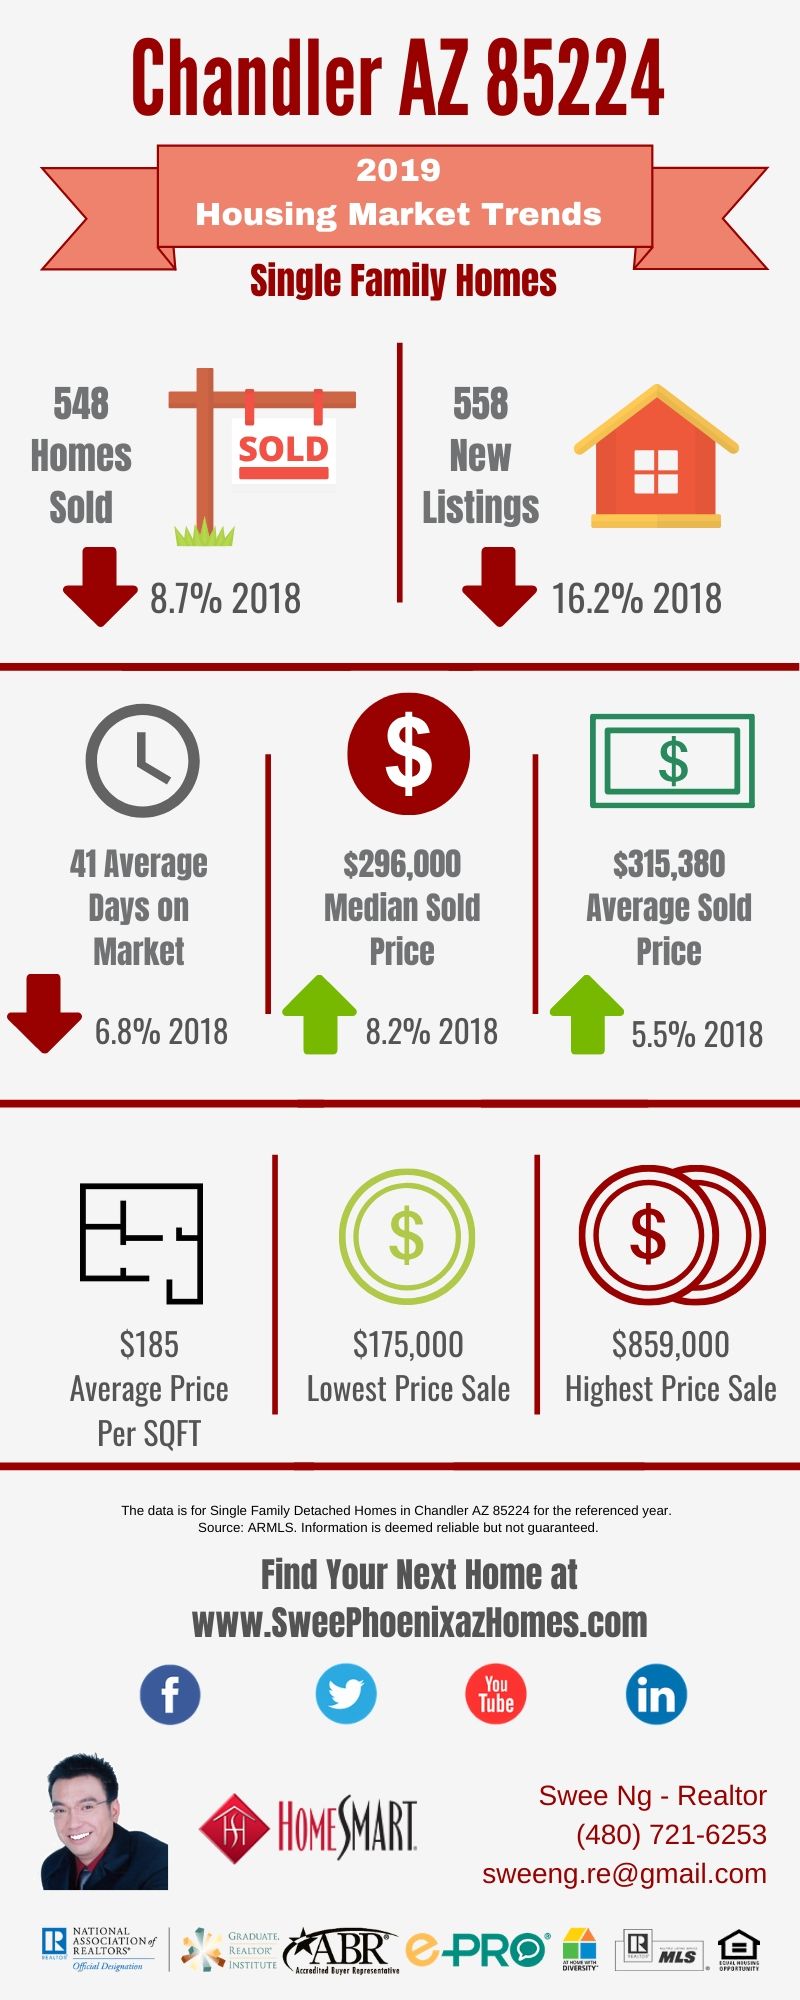 Chandler AZ 85224 Housing Market Trends Report 2019, House Value, Real Estate and Statistic by Swee Ng